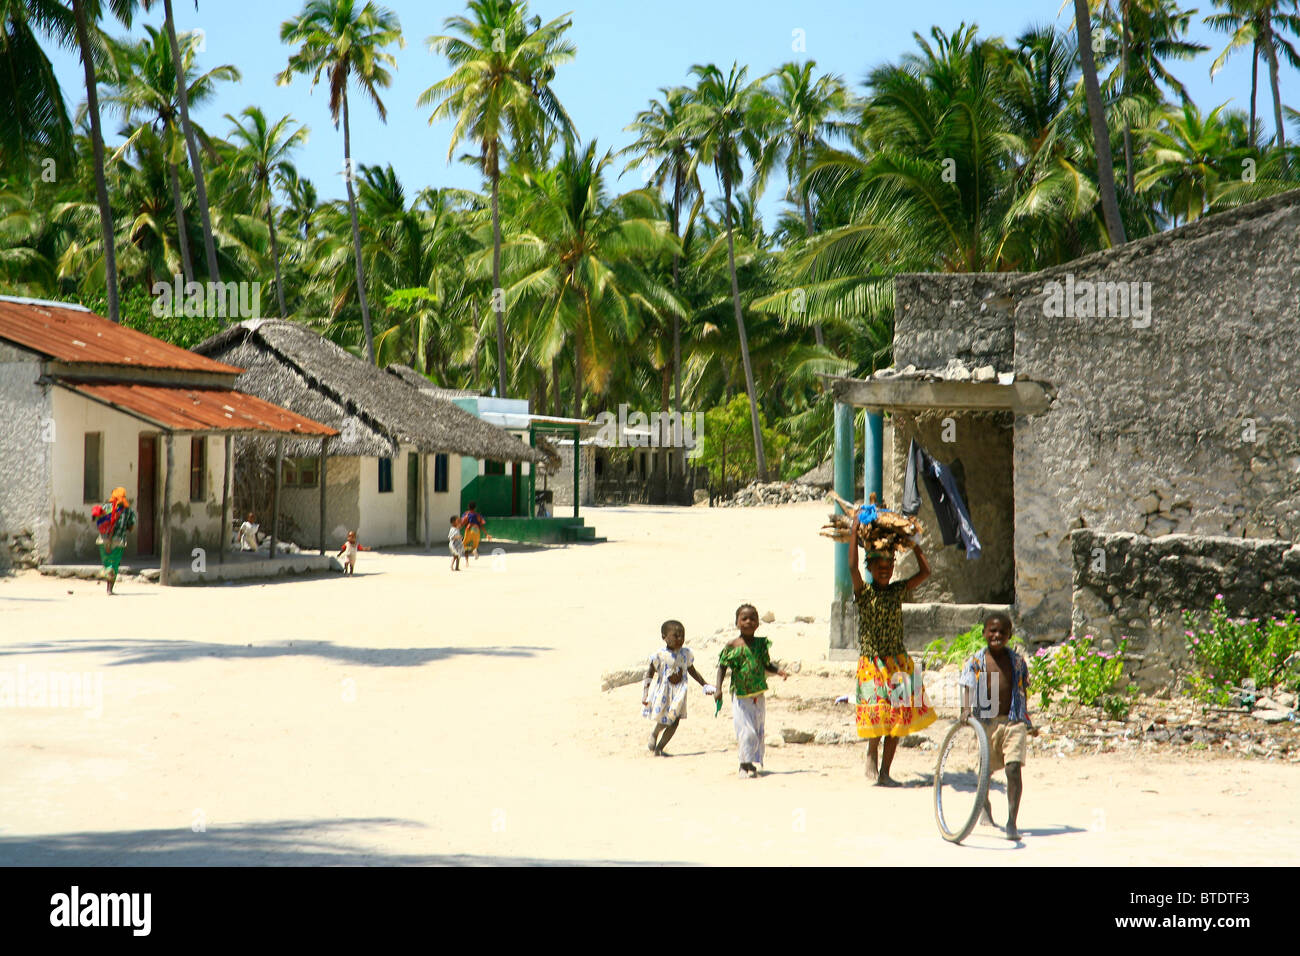 Woman carrying firewood and young children walking in a village on Ibo Island Stock Photo